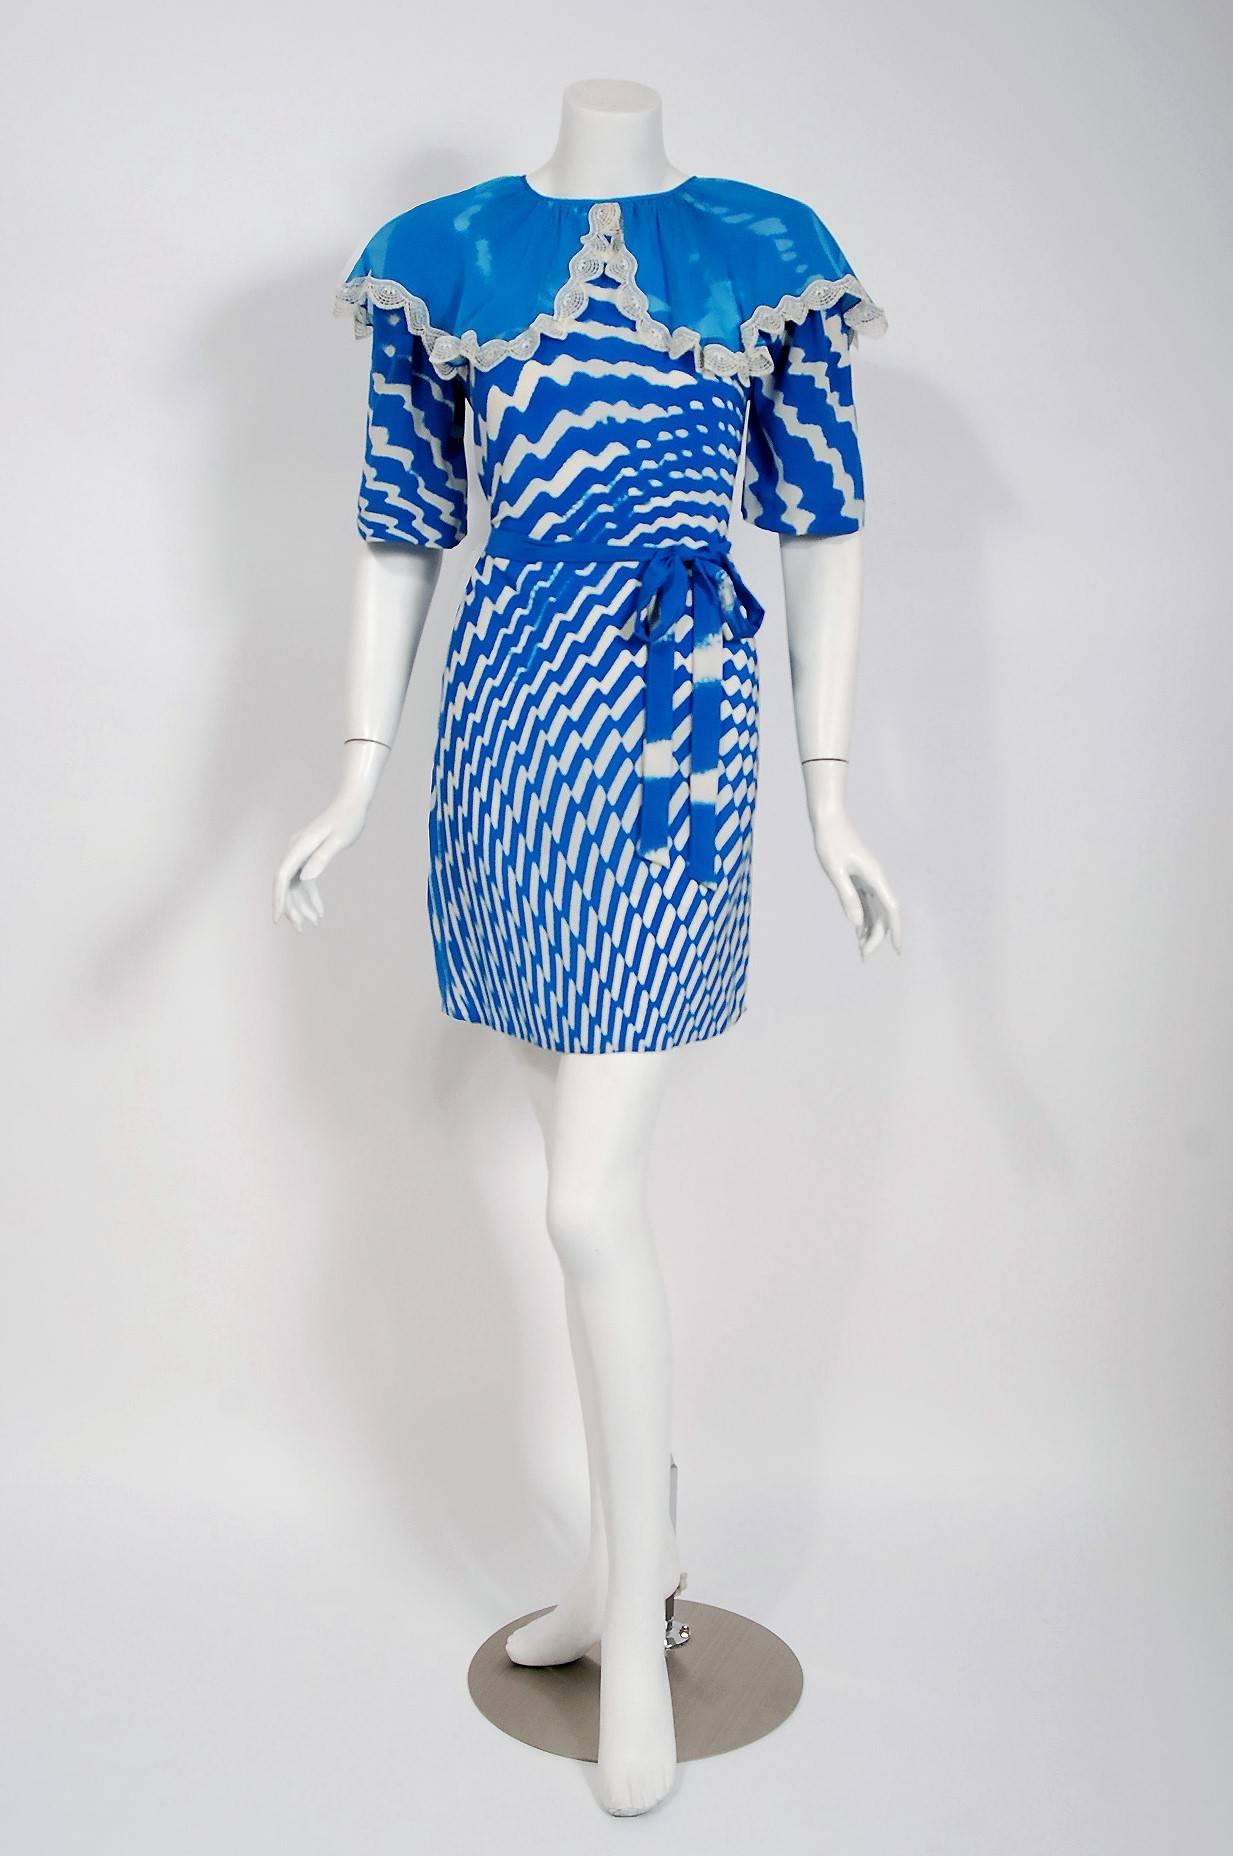 Gorgeous 1970 Thea Porter Couture tunic dress fashioned in a stunning blue and white graphic op-art print silk. I love that oversize flouncy sheer silk-chiffon lace trimmed collar. The bodice is a clear nod to 1930's fashion. The flirty mini length